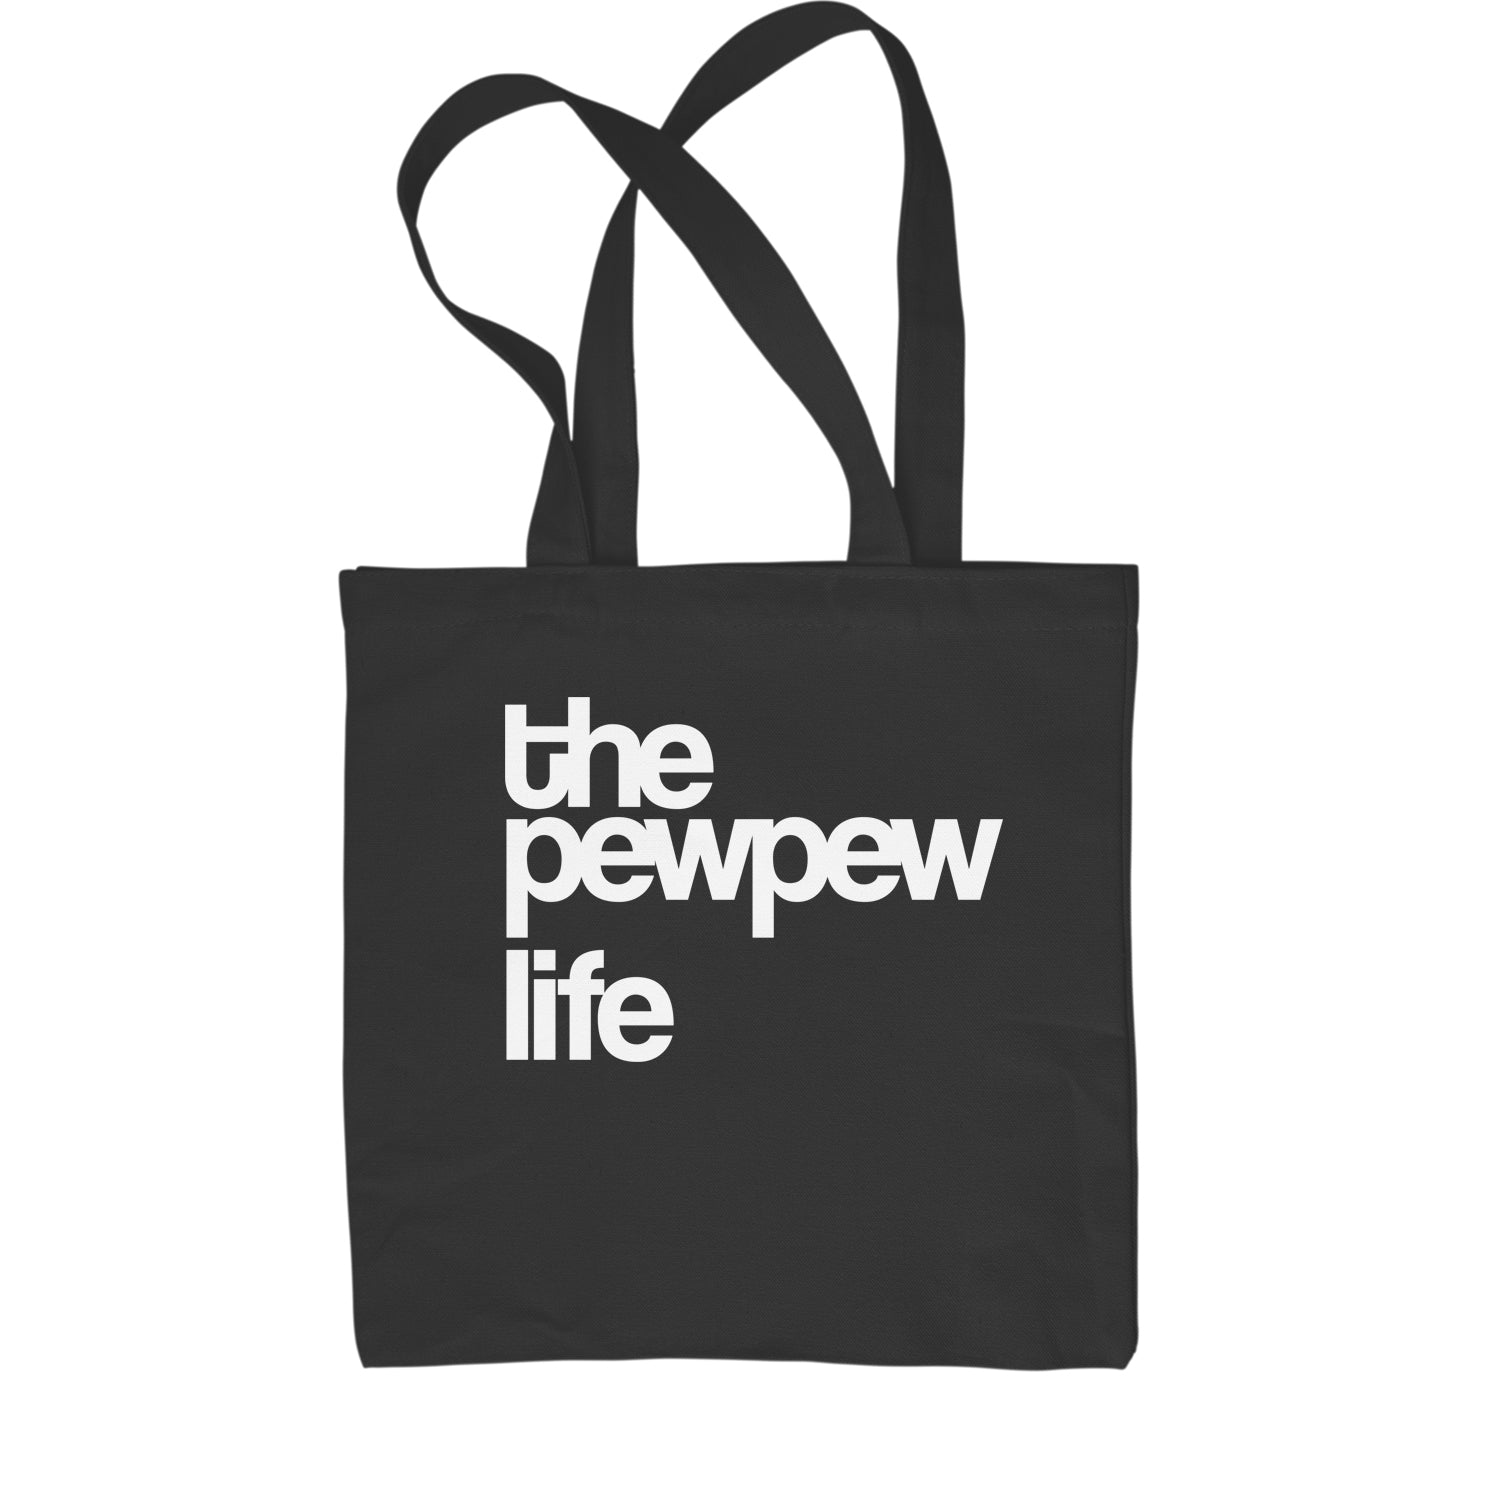 The PewPew Pew Pew Life Gun Rights Shopping Tote Bag #expressiontees by Expression Tees